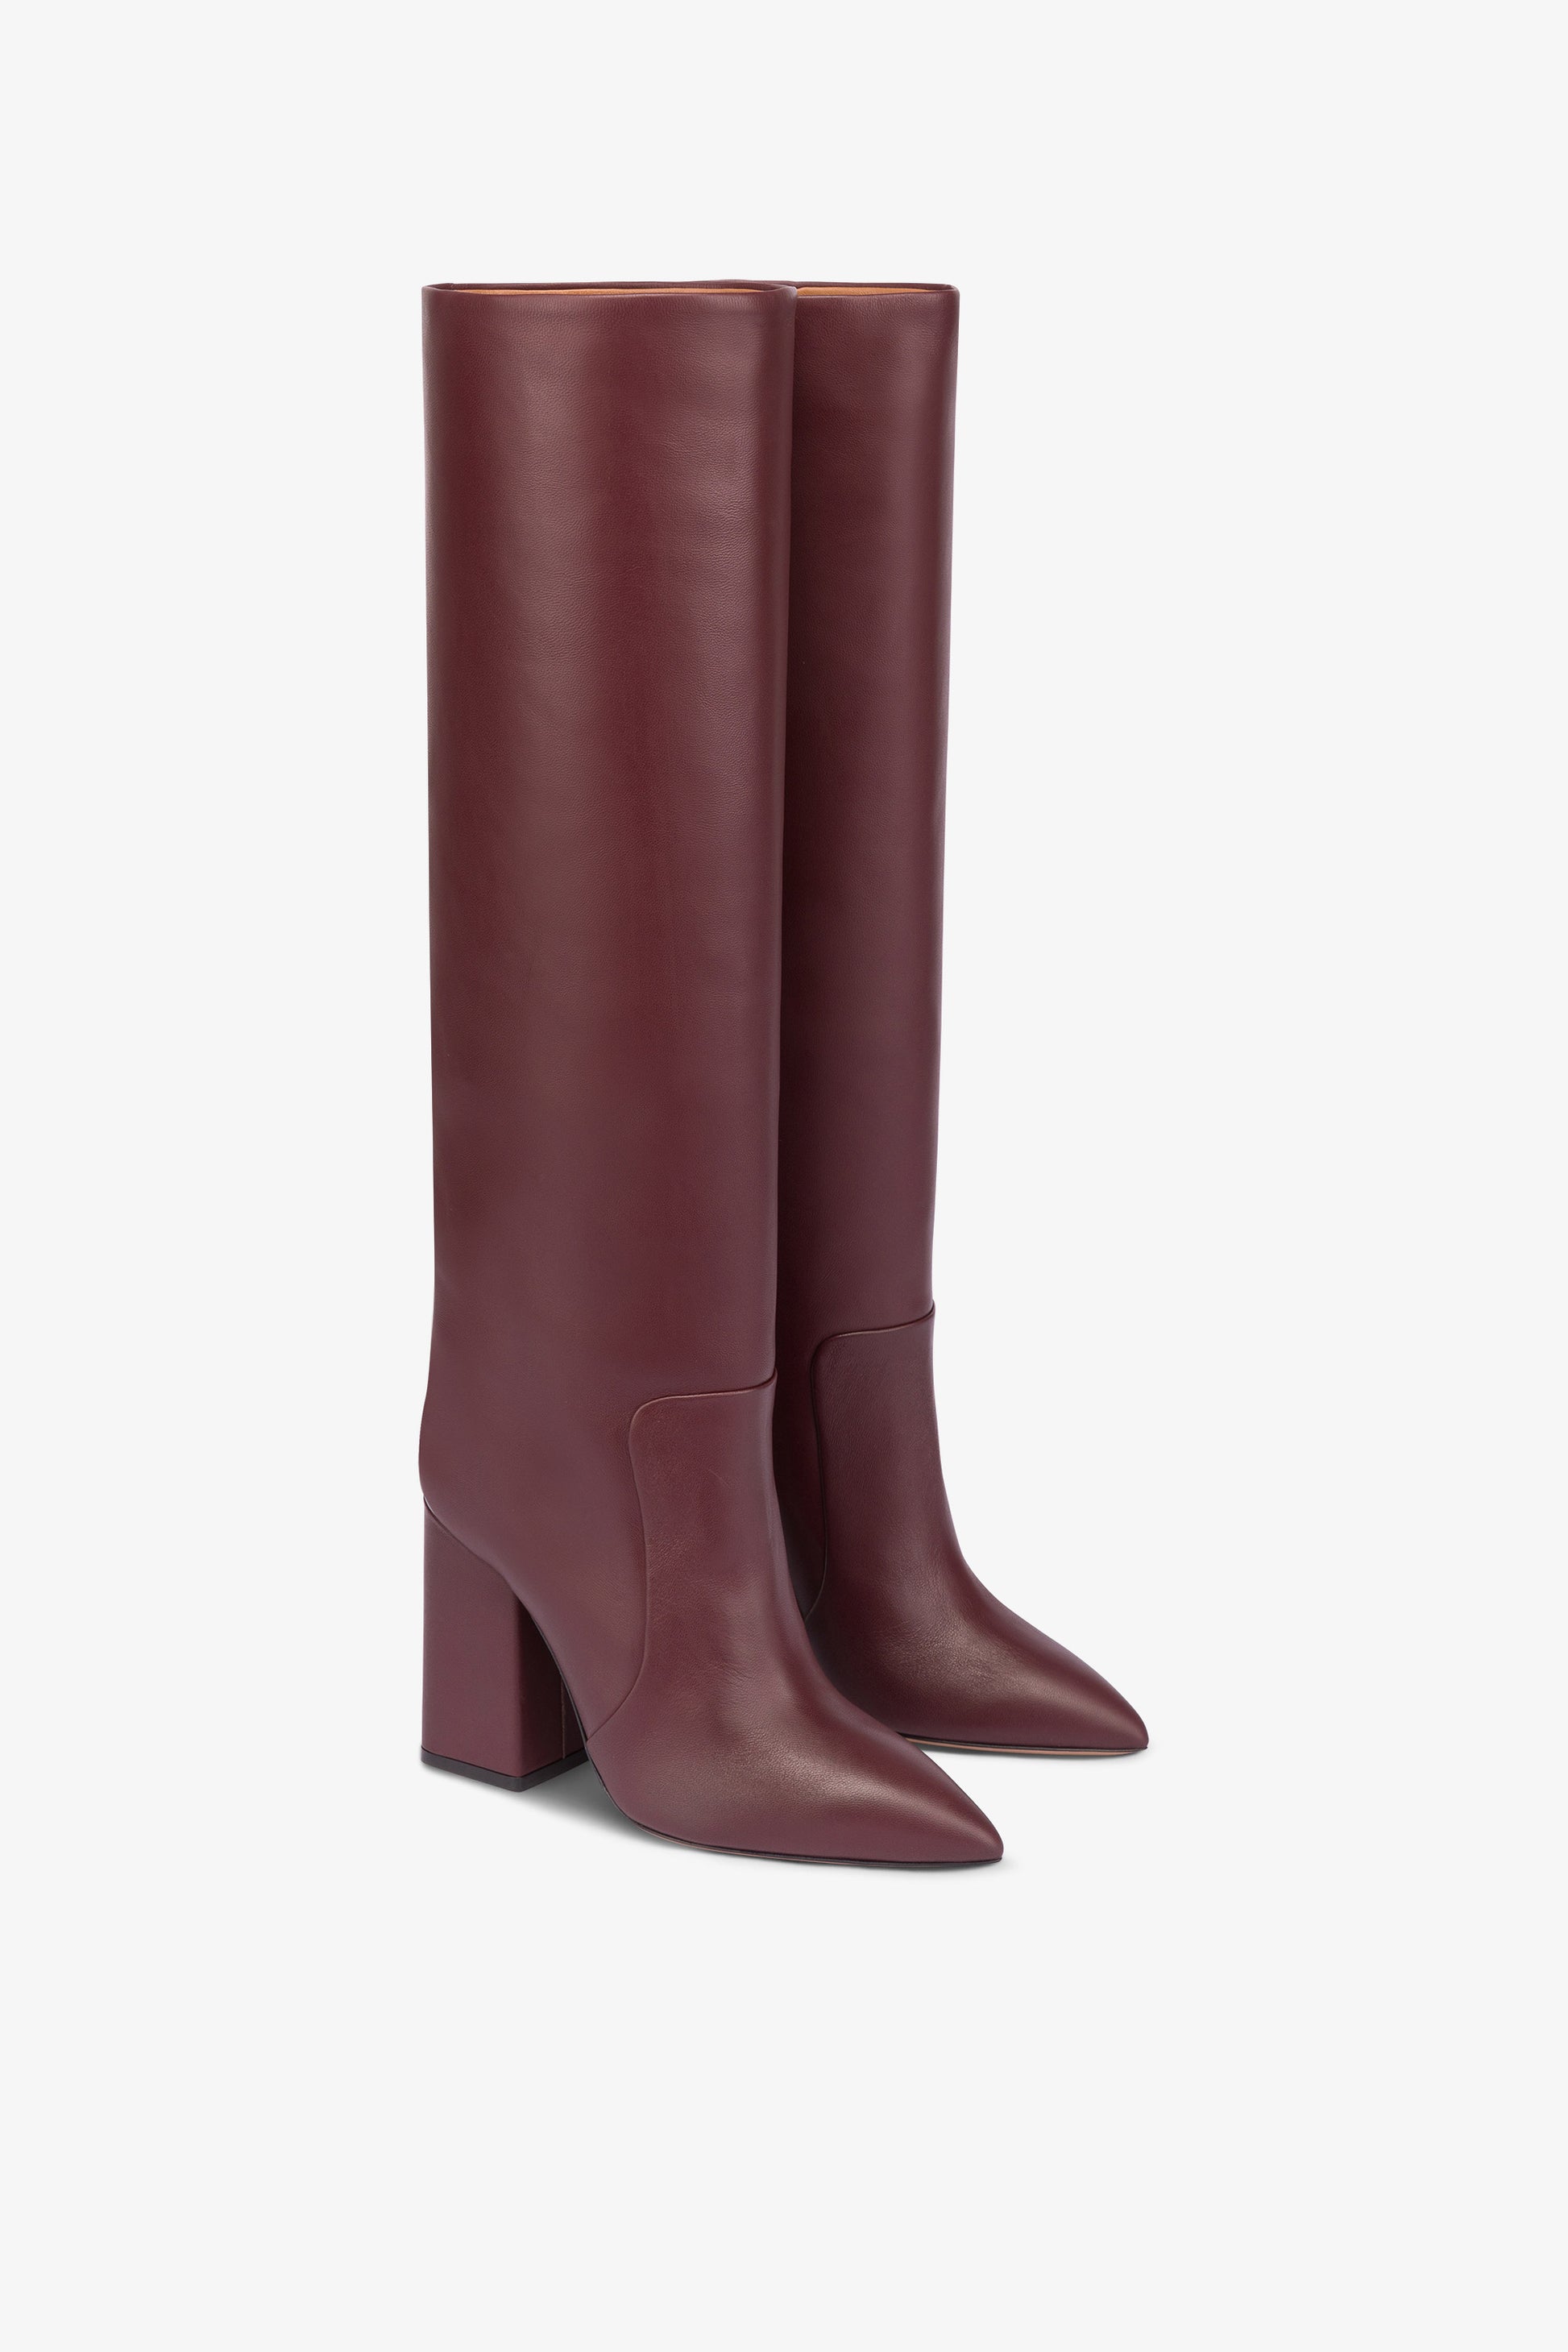 Knee-high boots in smooth burgundy leather